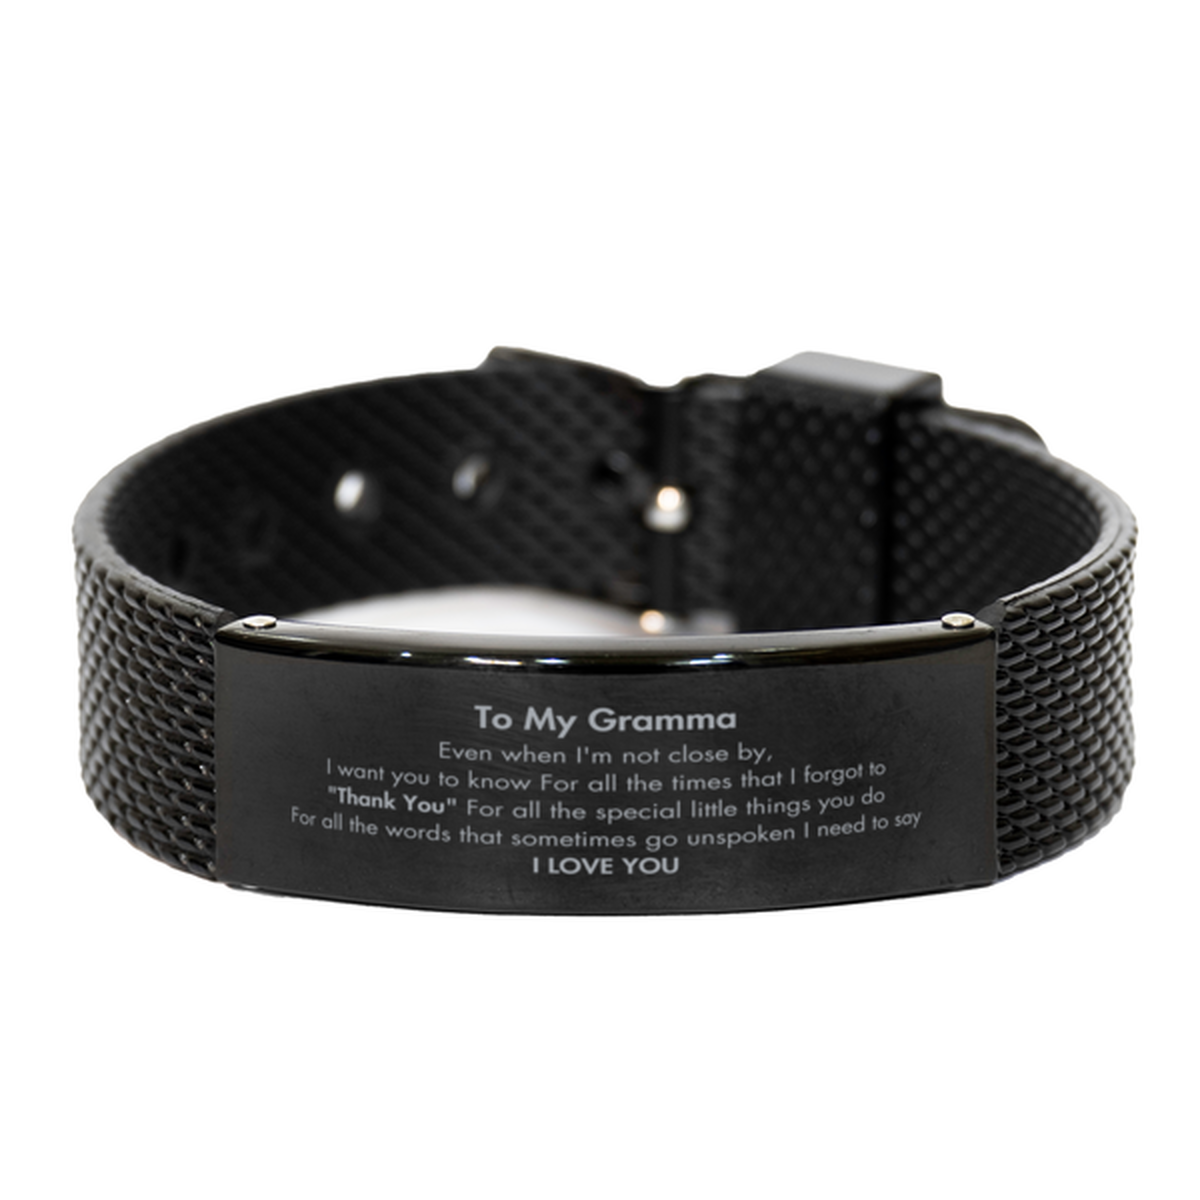 Thank You Gifts for Gramma, Keepsake Black Shark Mesh Bracelet Gifts for Gramma Birthday Mother's day Father's Day Gramma For all the words That sometimes go unspoken I need to say I LOVE YOU